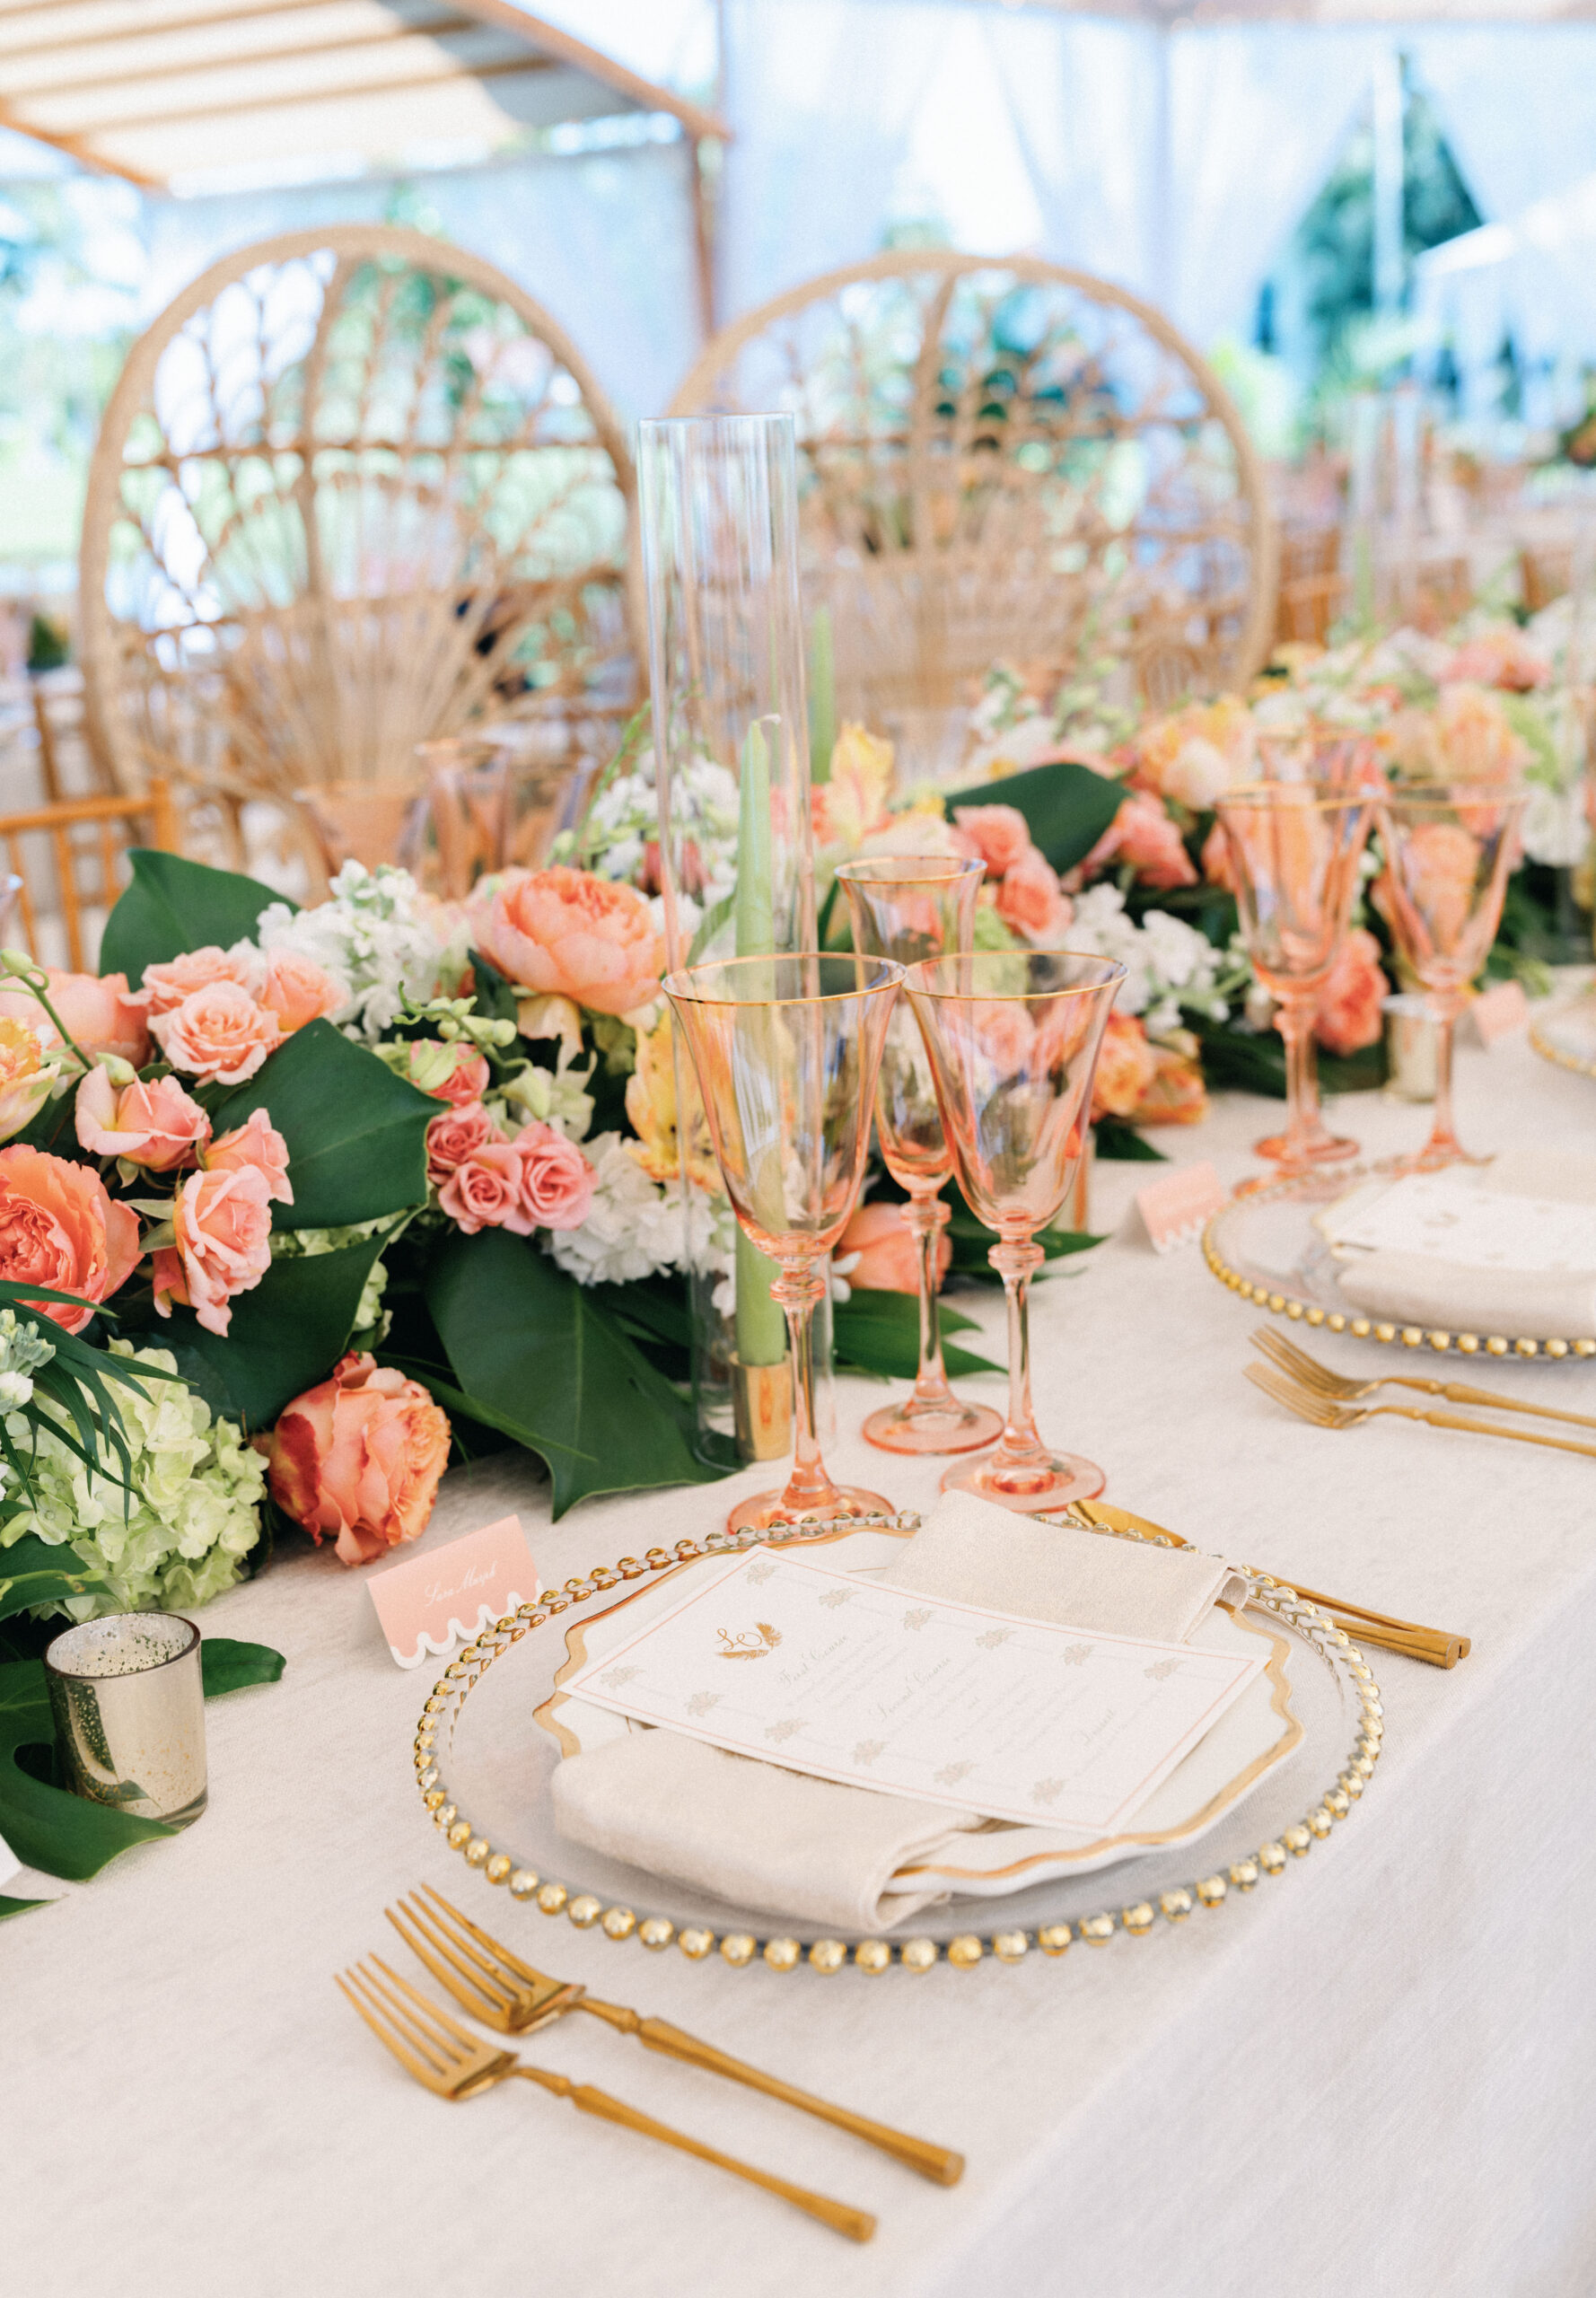 Pink, peach and coral wedding decor